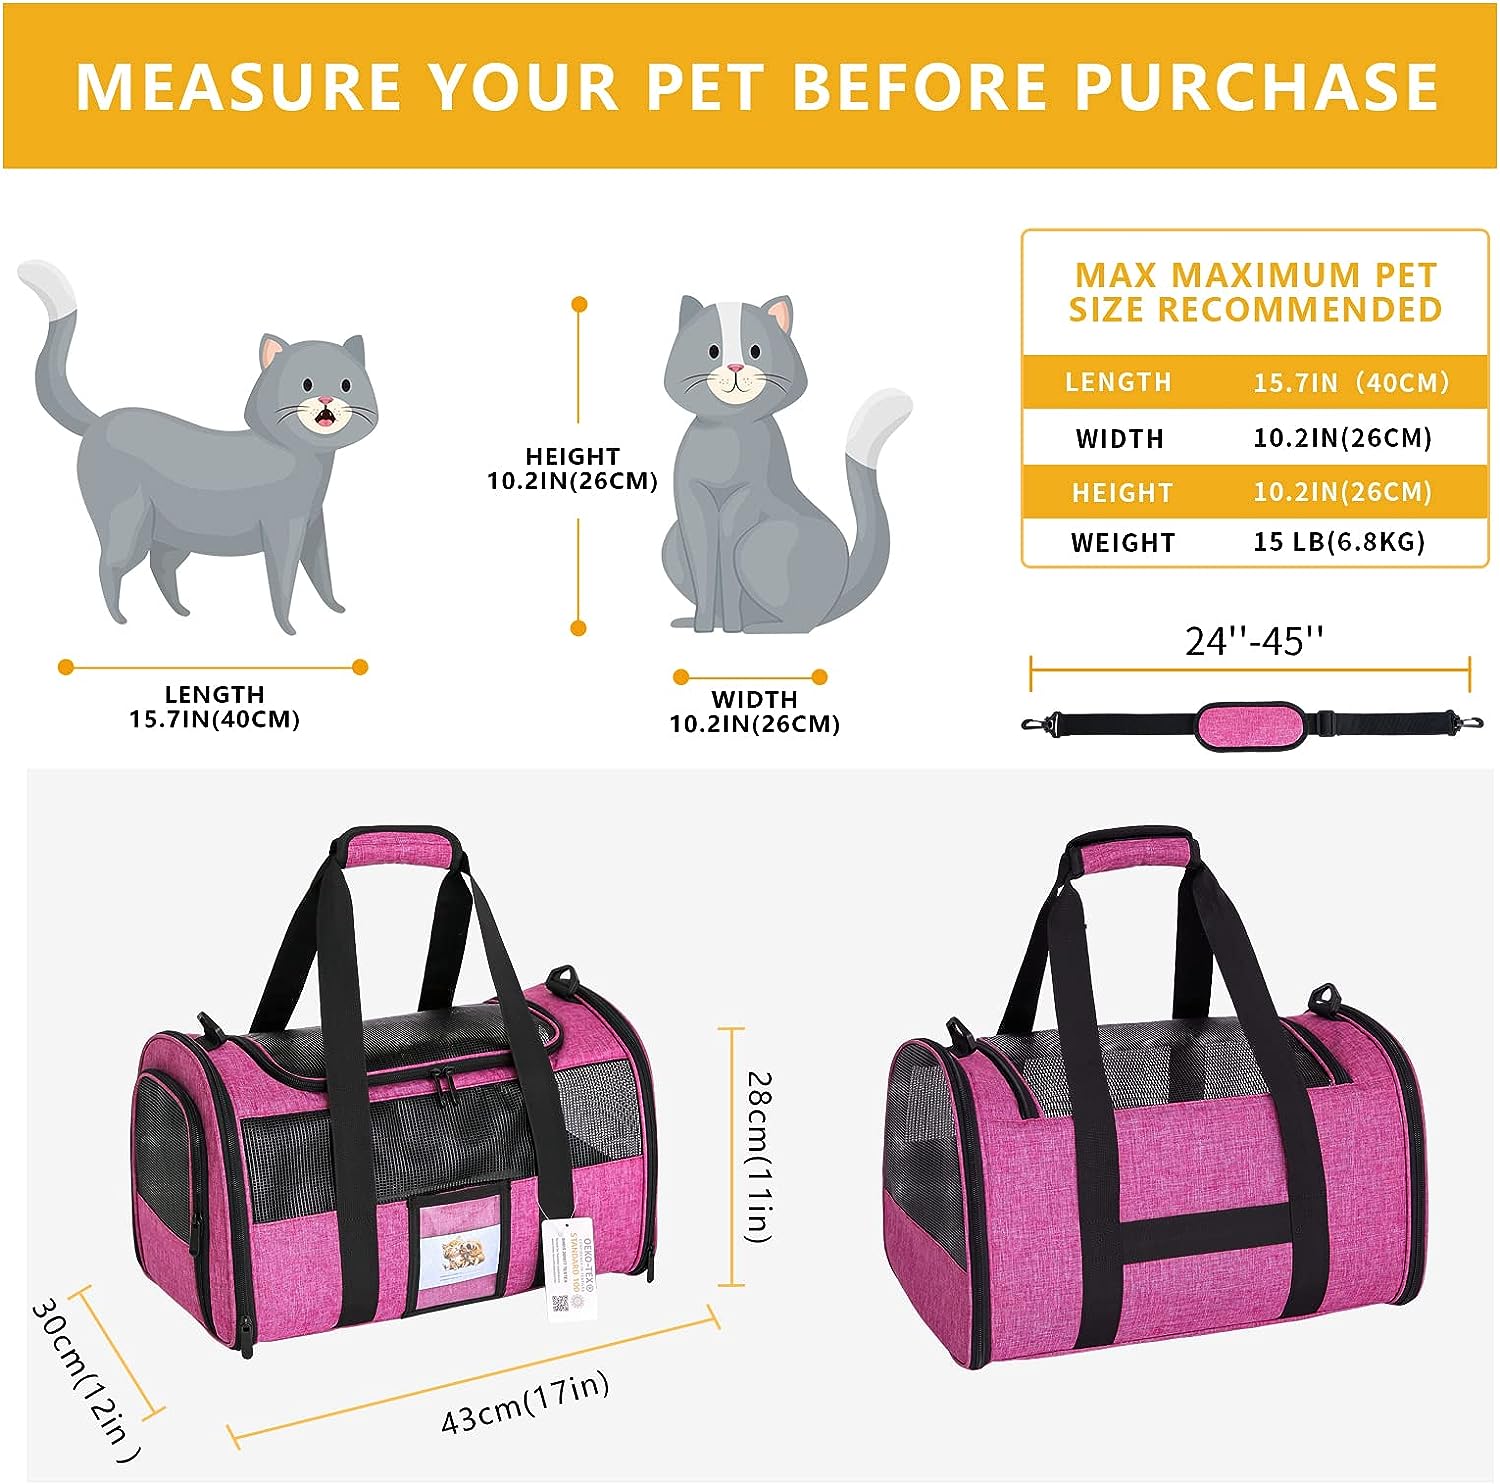 Cat, Dog, Pet Carrier Airline Approved for Cat, Small Dogs, Kitten, Carriers for Small Medium Cats Under 15lb, Collapsible Soft Sided TSA Approved Cat Travel Carrier